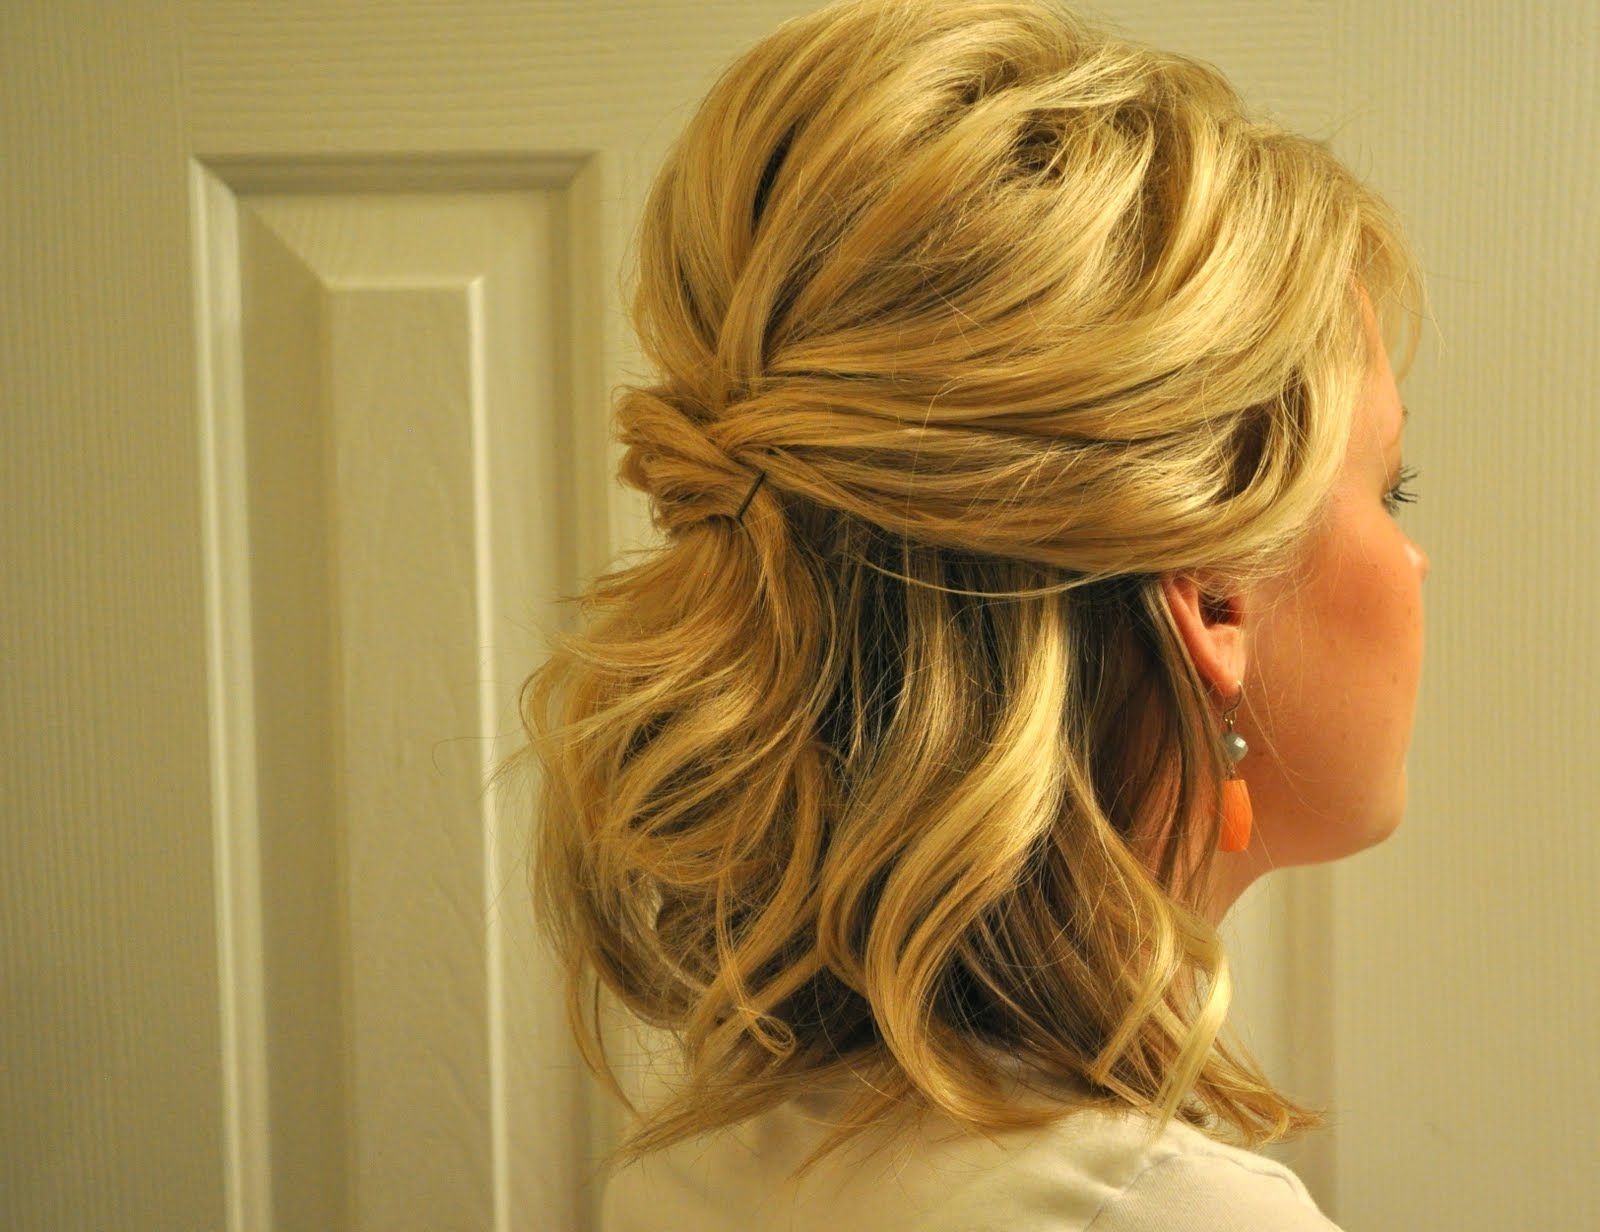 Famous Lifted Curls Updo Hairstyles For Weddings Regarding Half Up To Full Updo – The Small Things Blog (View 15 of 20)